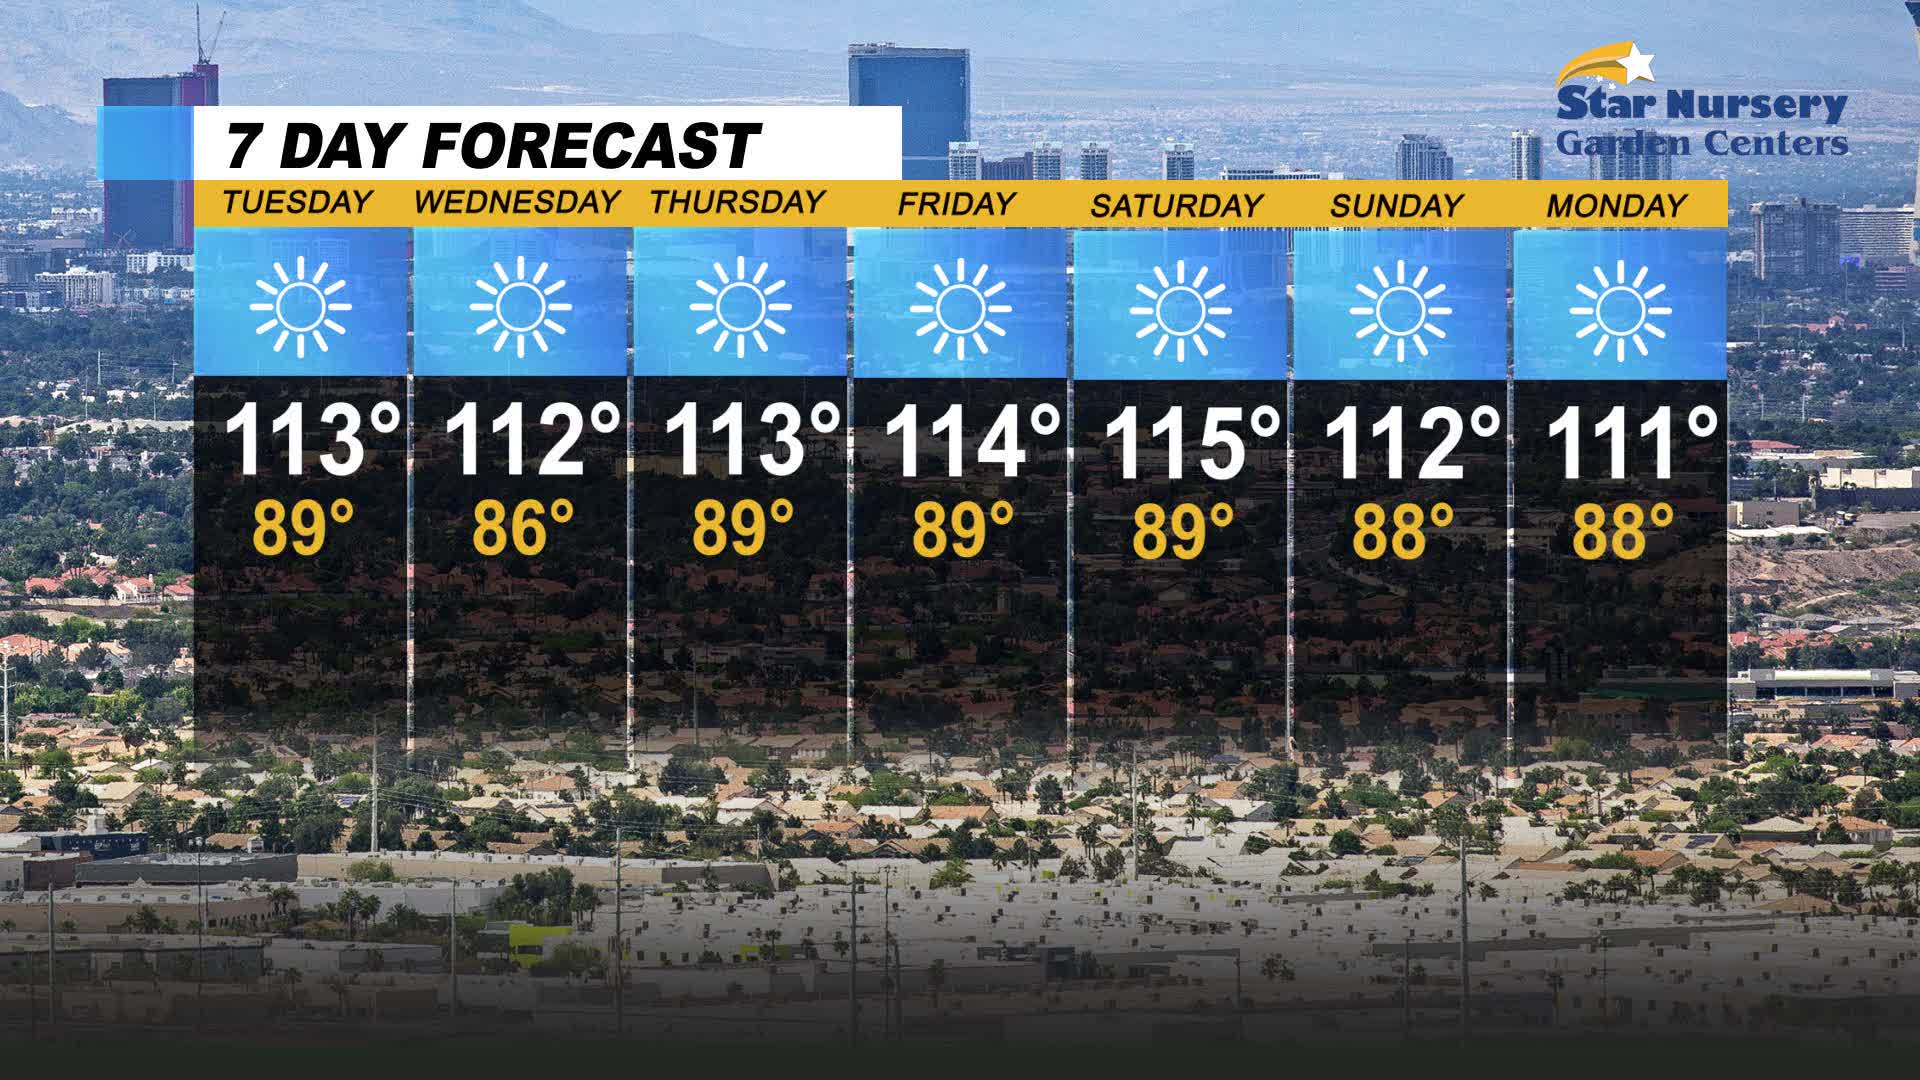 Temperatures continue to stay above 110 throughout the week